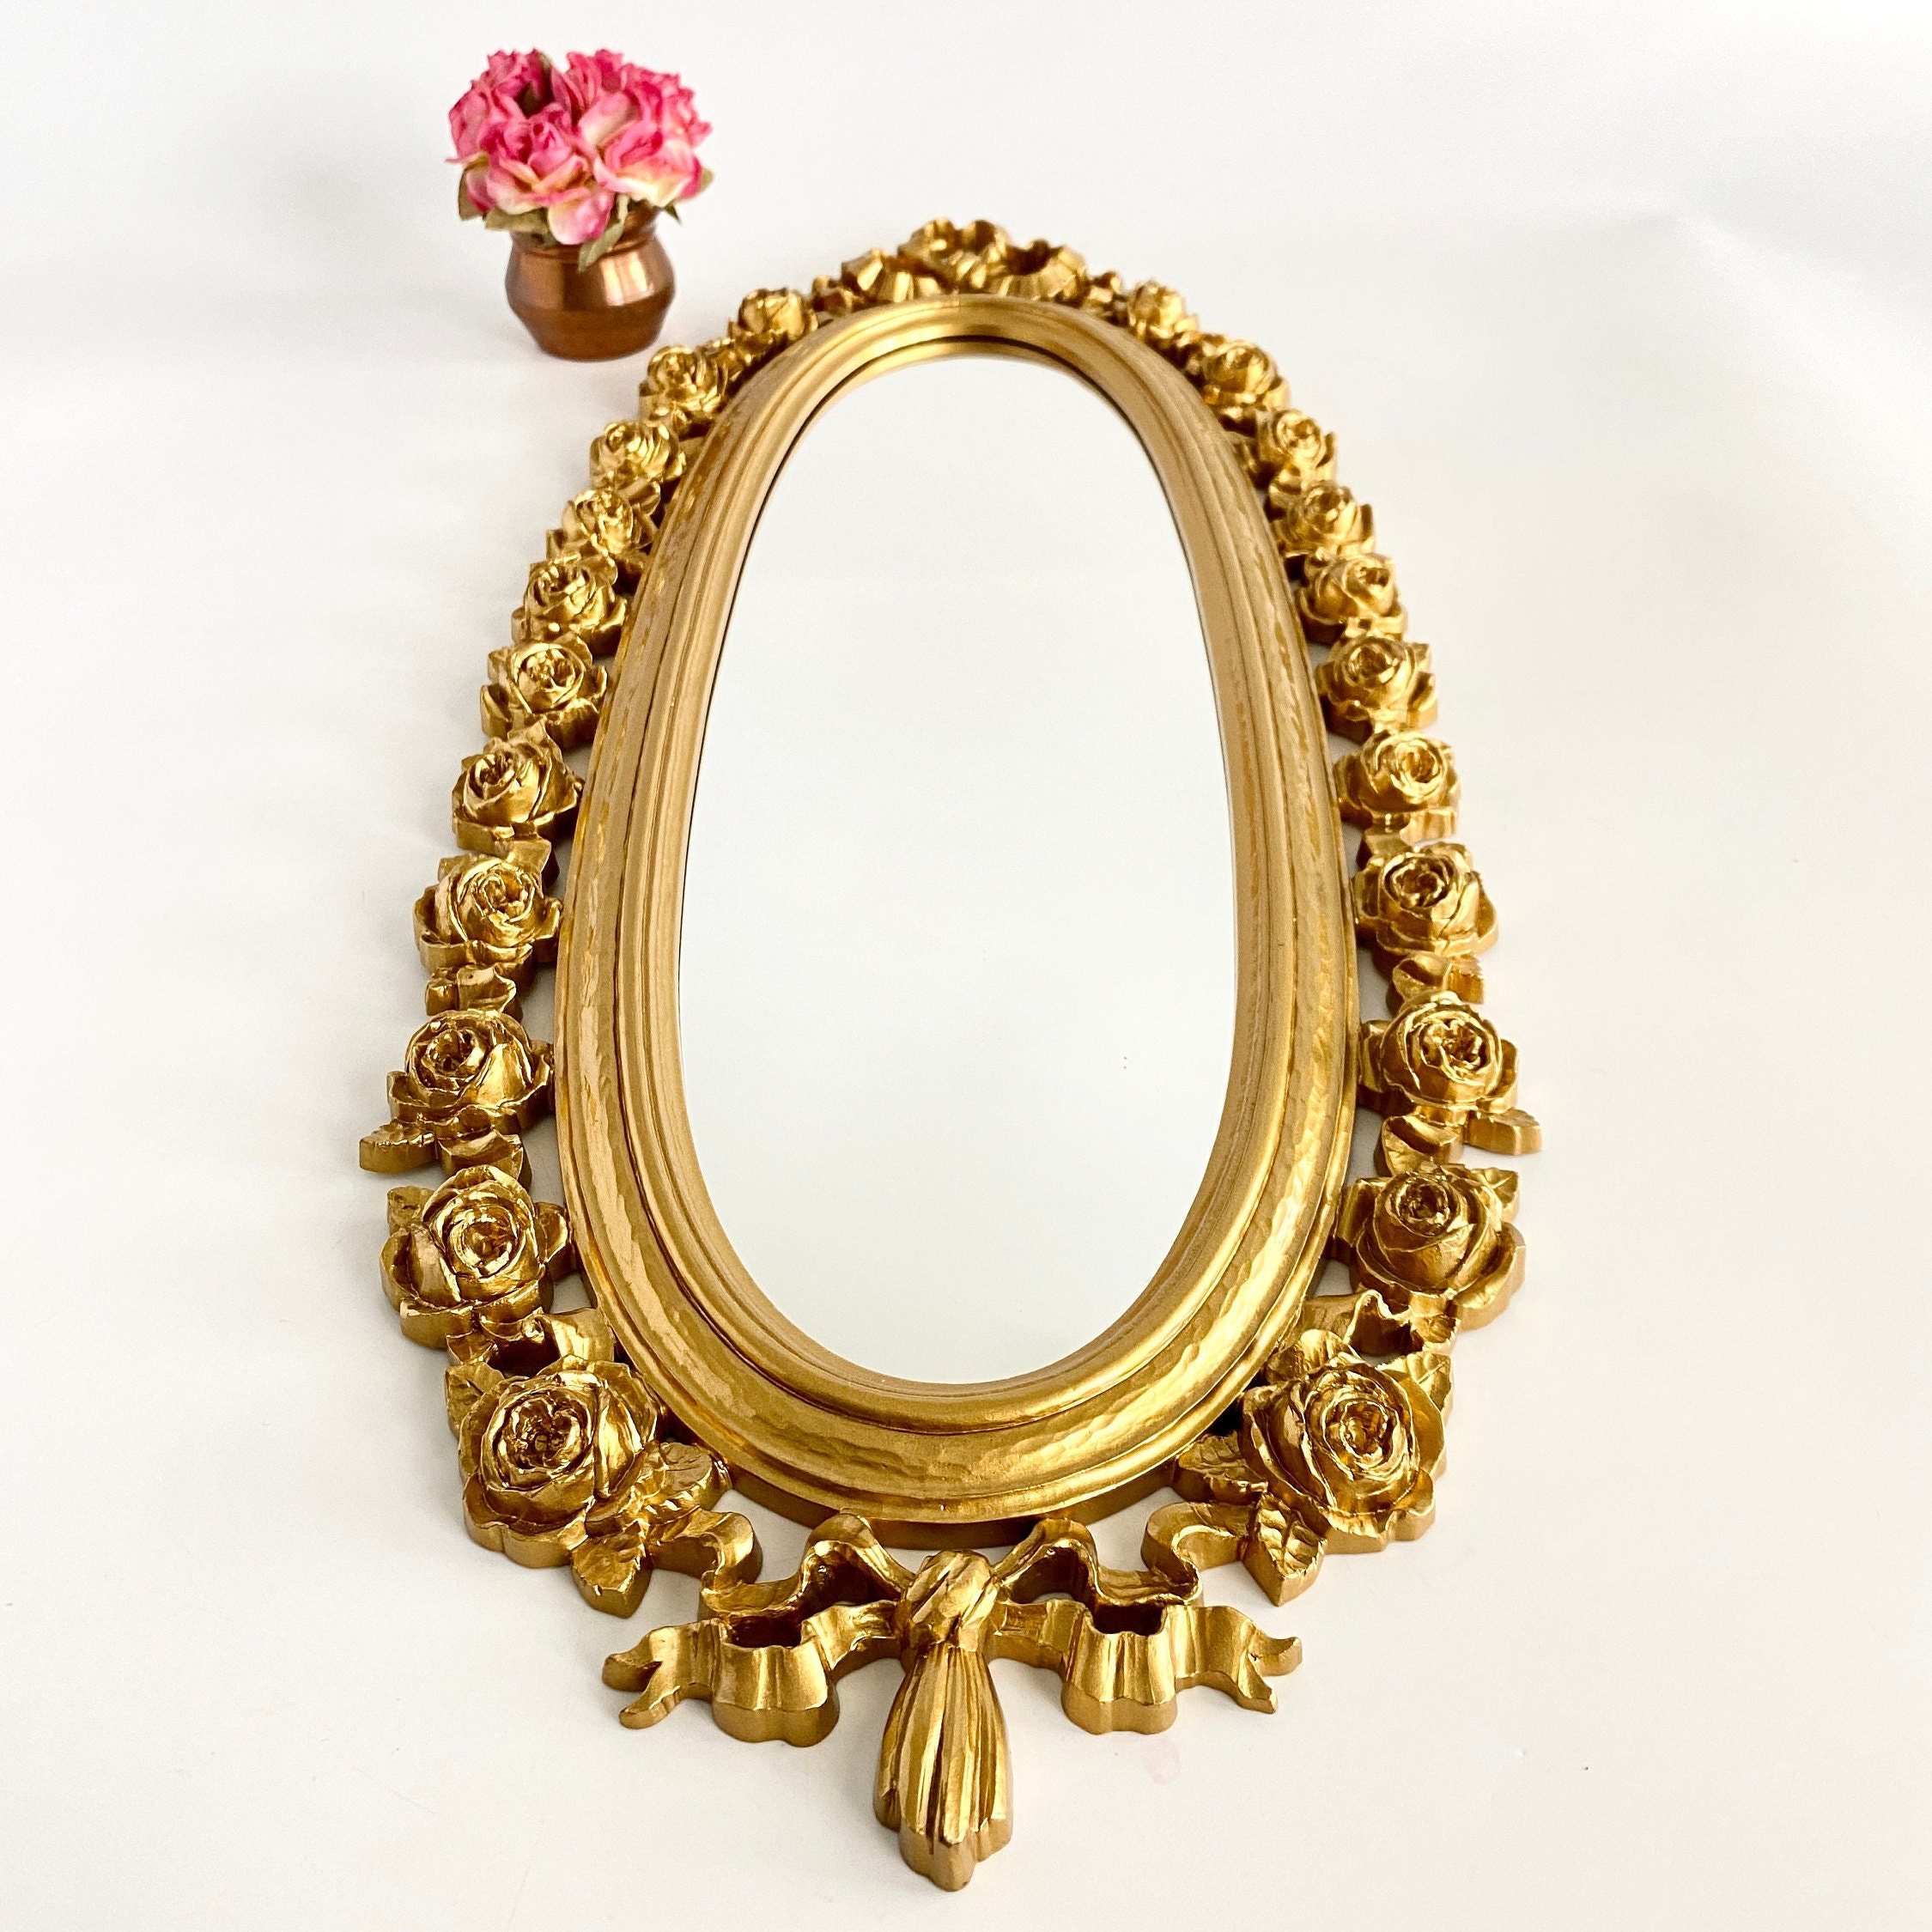 Gold Plastic Oval Mirror Makeover  Confessions of a Serial Do-it